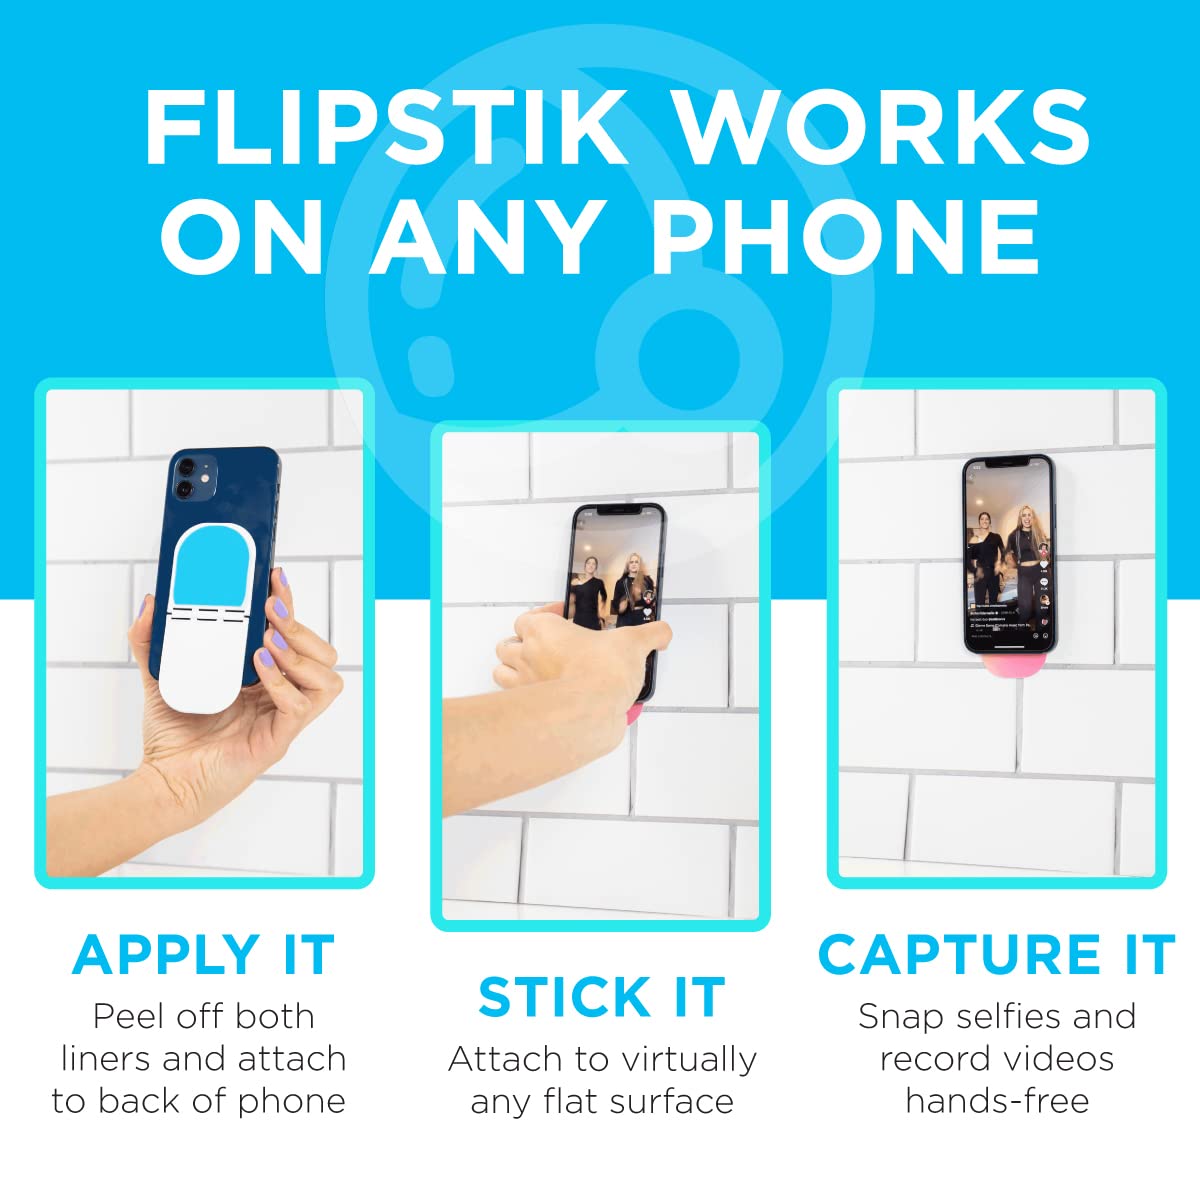 Flipstik 2.0 Foldable Adhesive Phone Mount – Sticks to Any Flat Surface – Hands Free Selfies, Videos, Car Mount, Phone Stand, Travel Accessory – Sticky Phone Mount | Classic Color Black